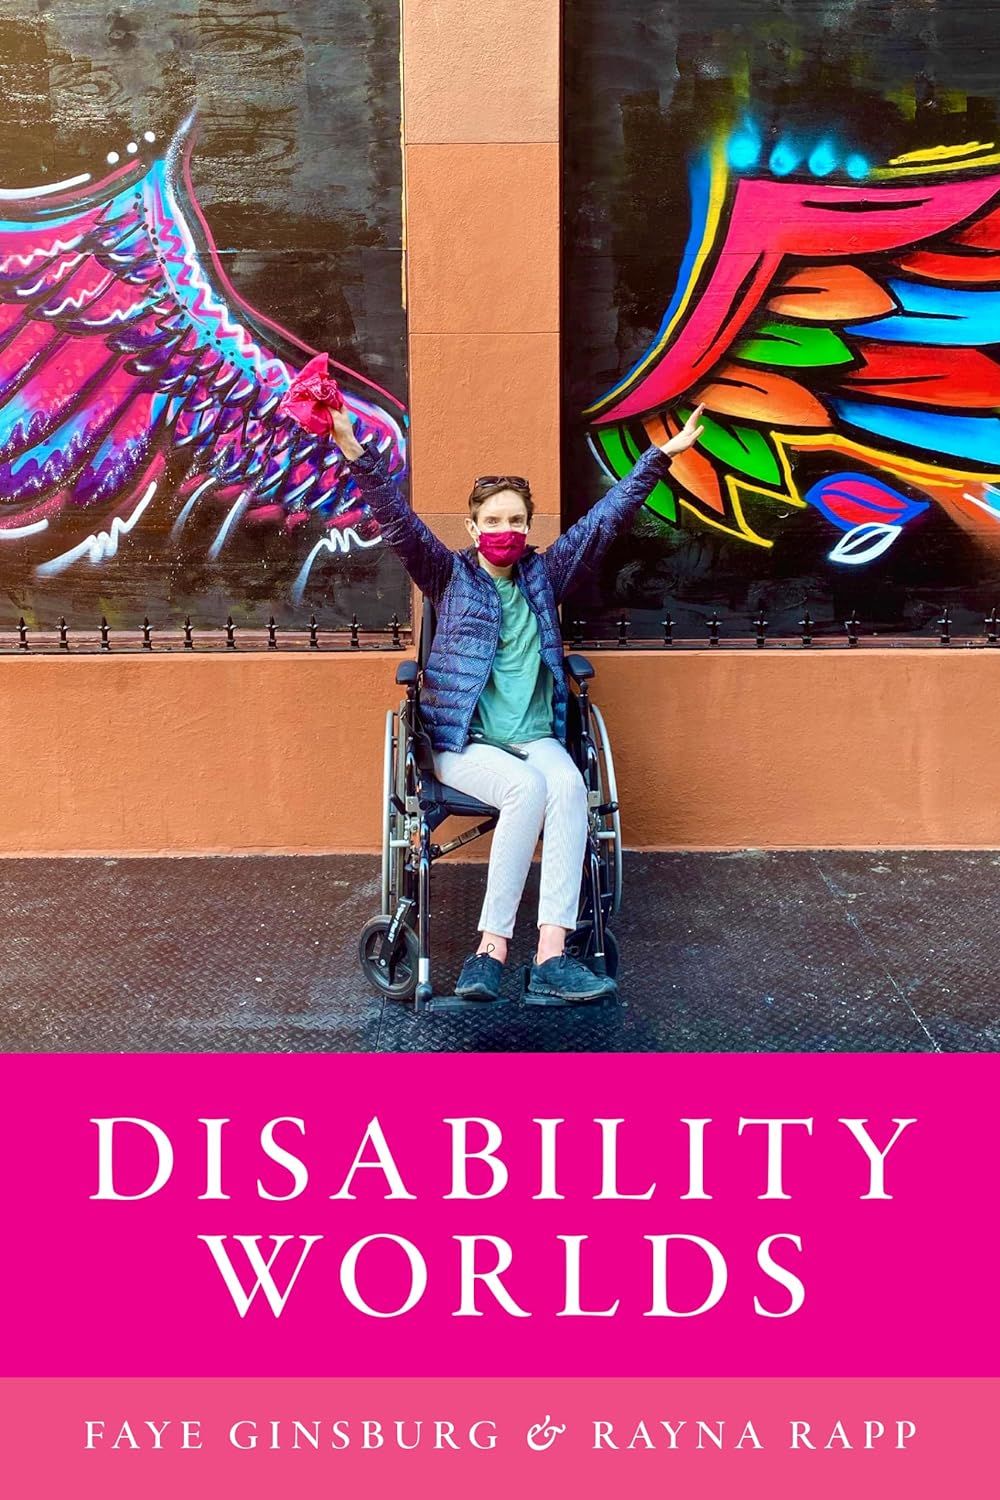 a graphic of the cover of Disability Worlds by Faye Ginsburg and Rayna Rapp